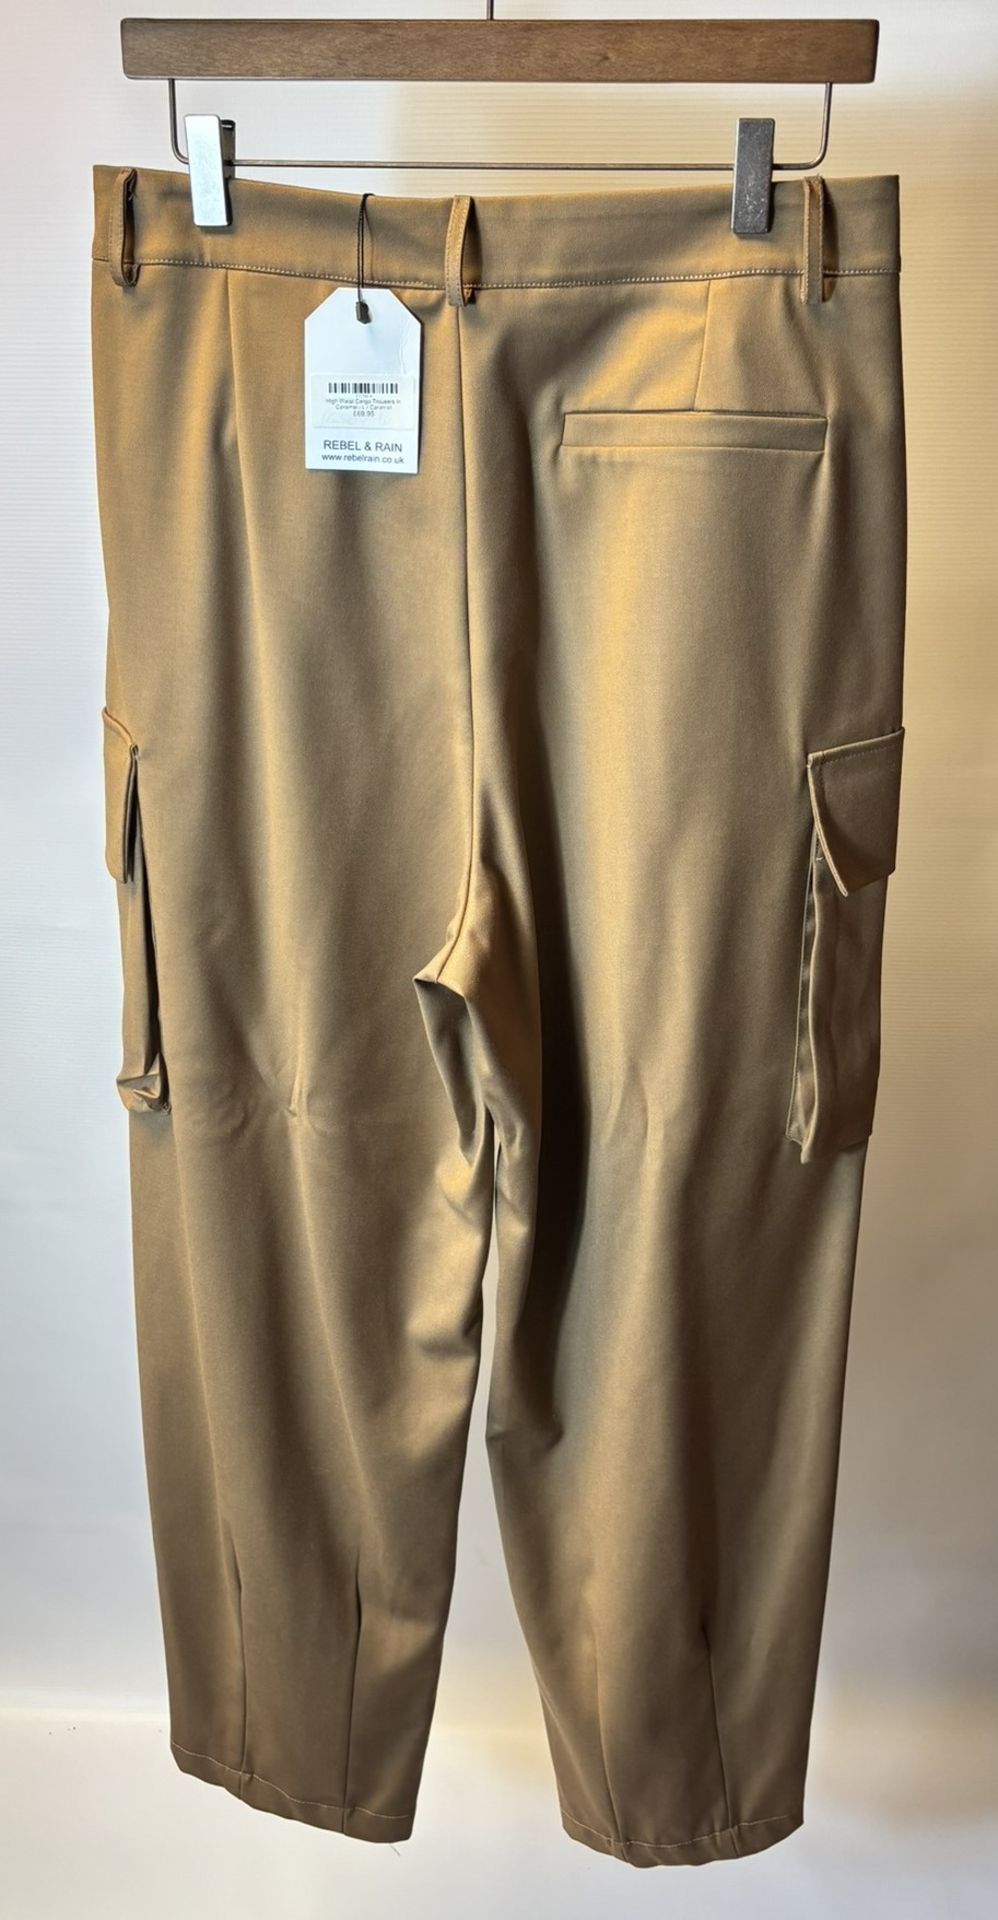 15 x Various Pairs Of Women's Trousers As Seen In Photos - Image 44 of 45